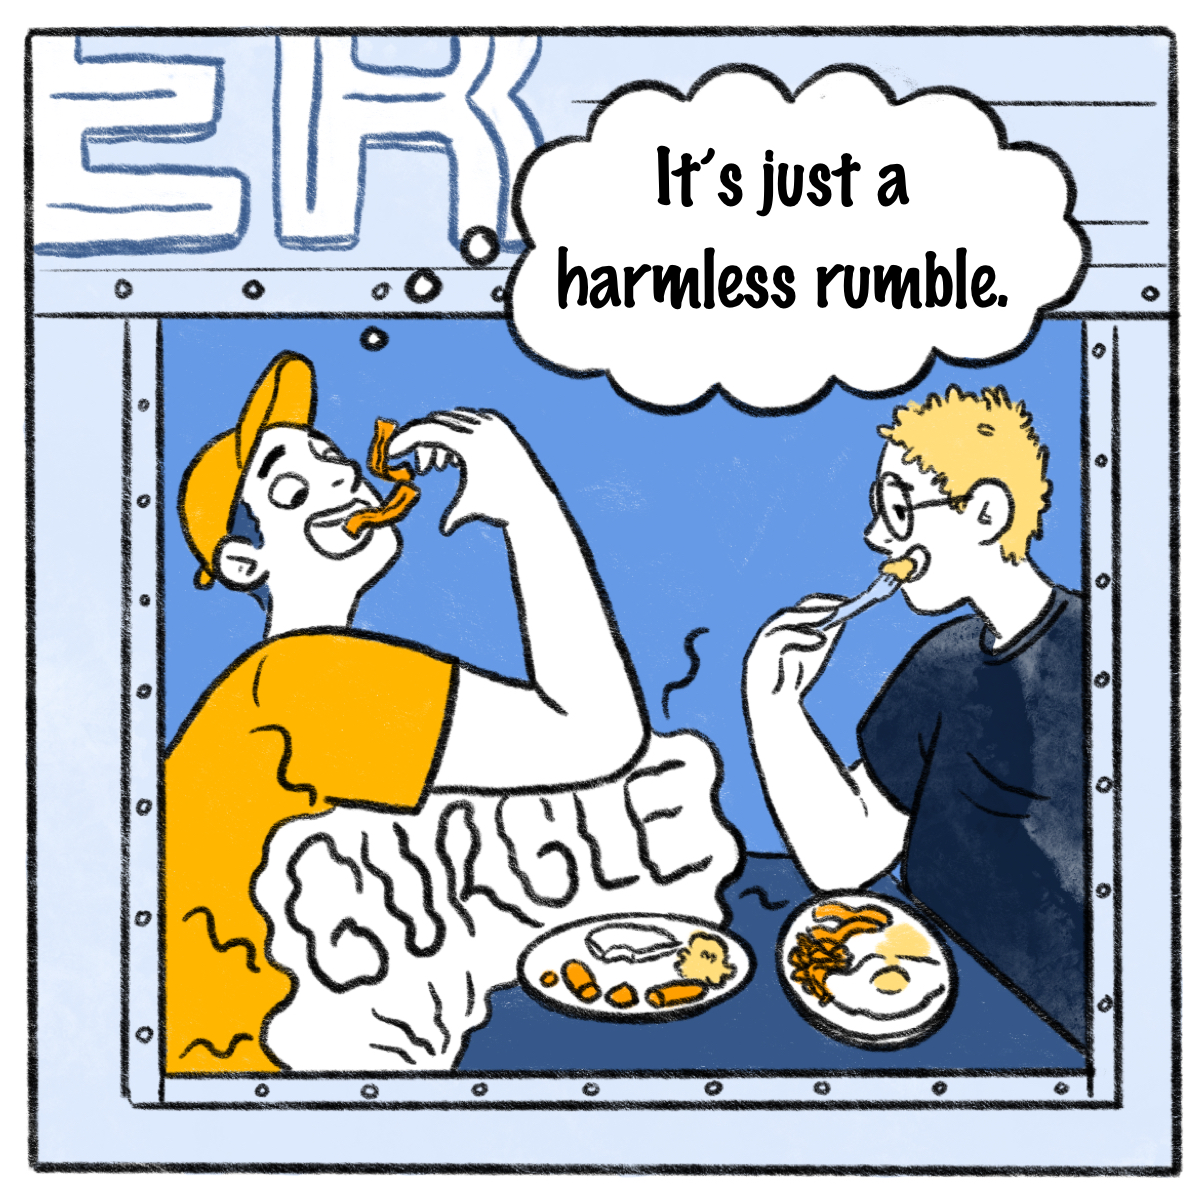 Two people are in a diner window eating breakfast, a gurgle comes from the man's stomach and a thought bubble says "It's just a harmless rumble"